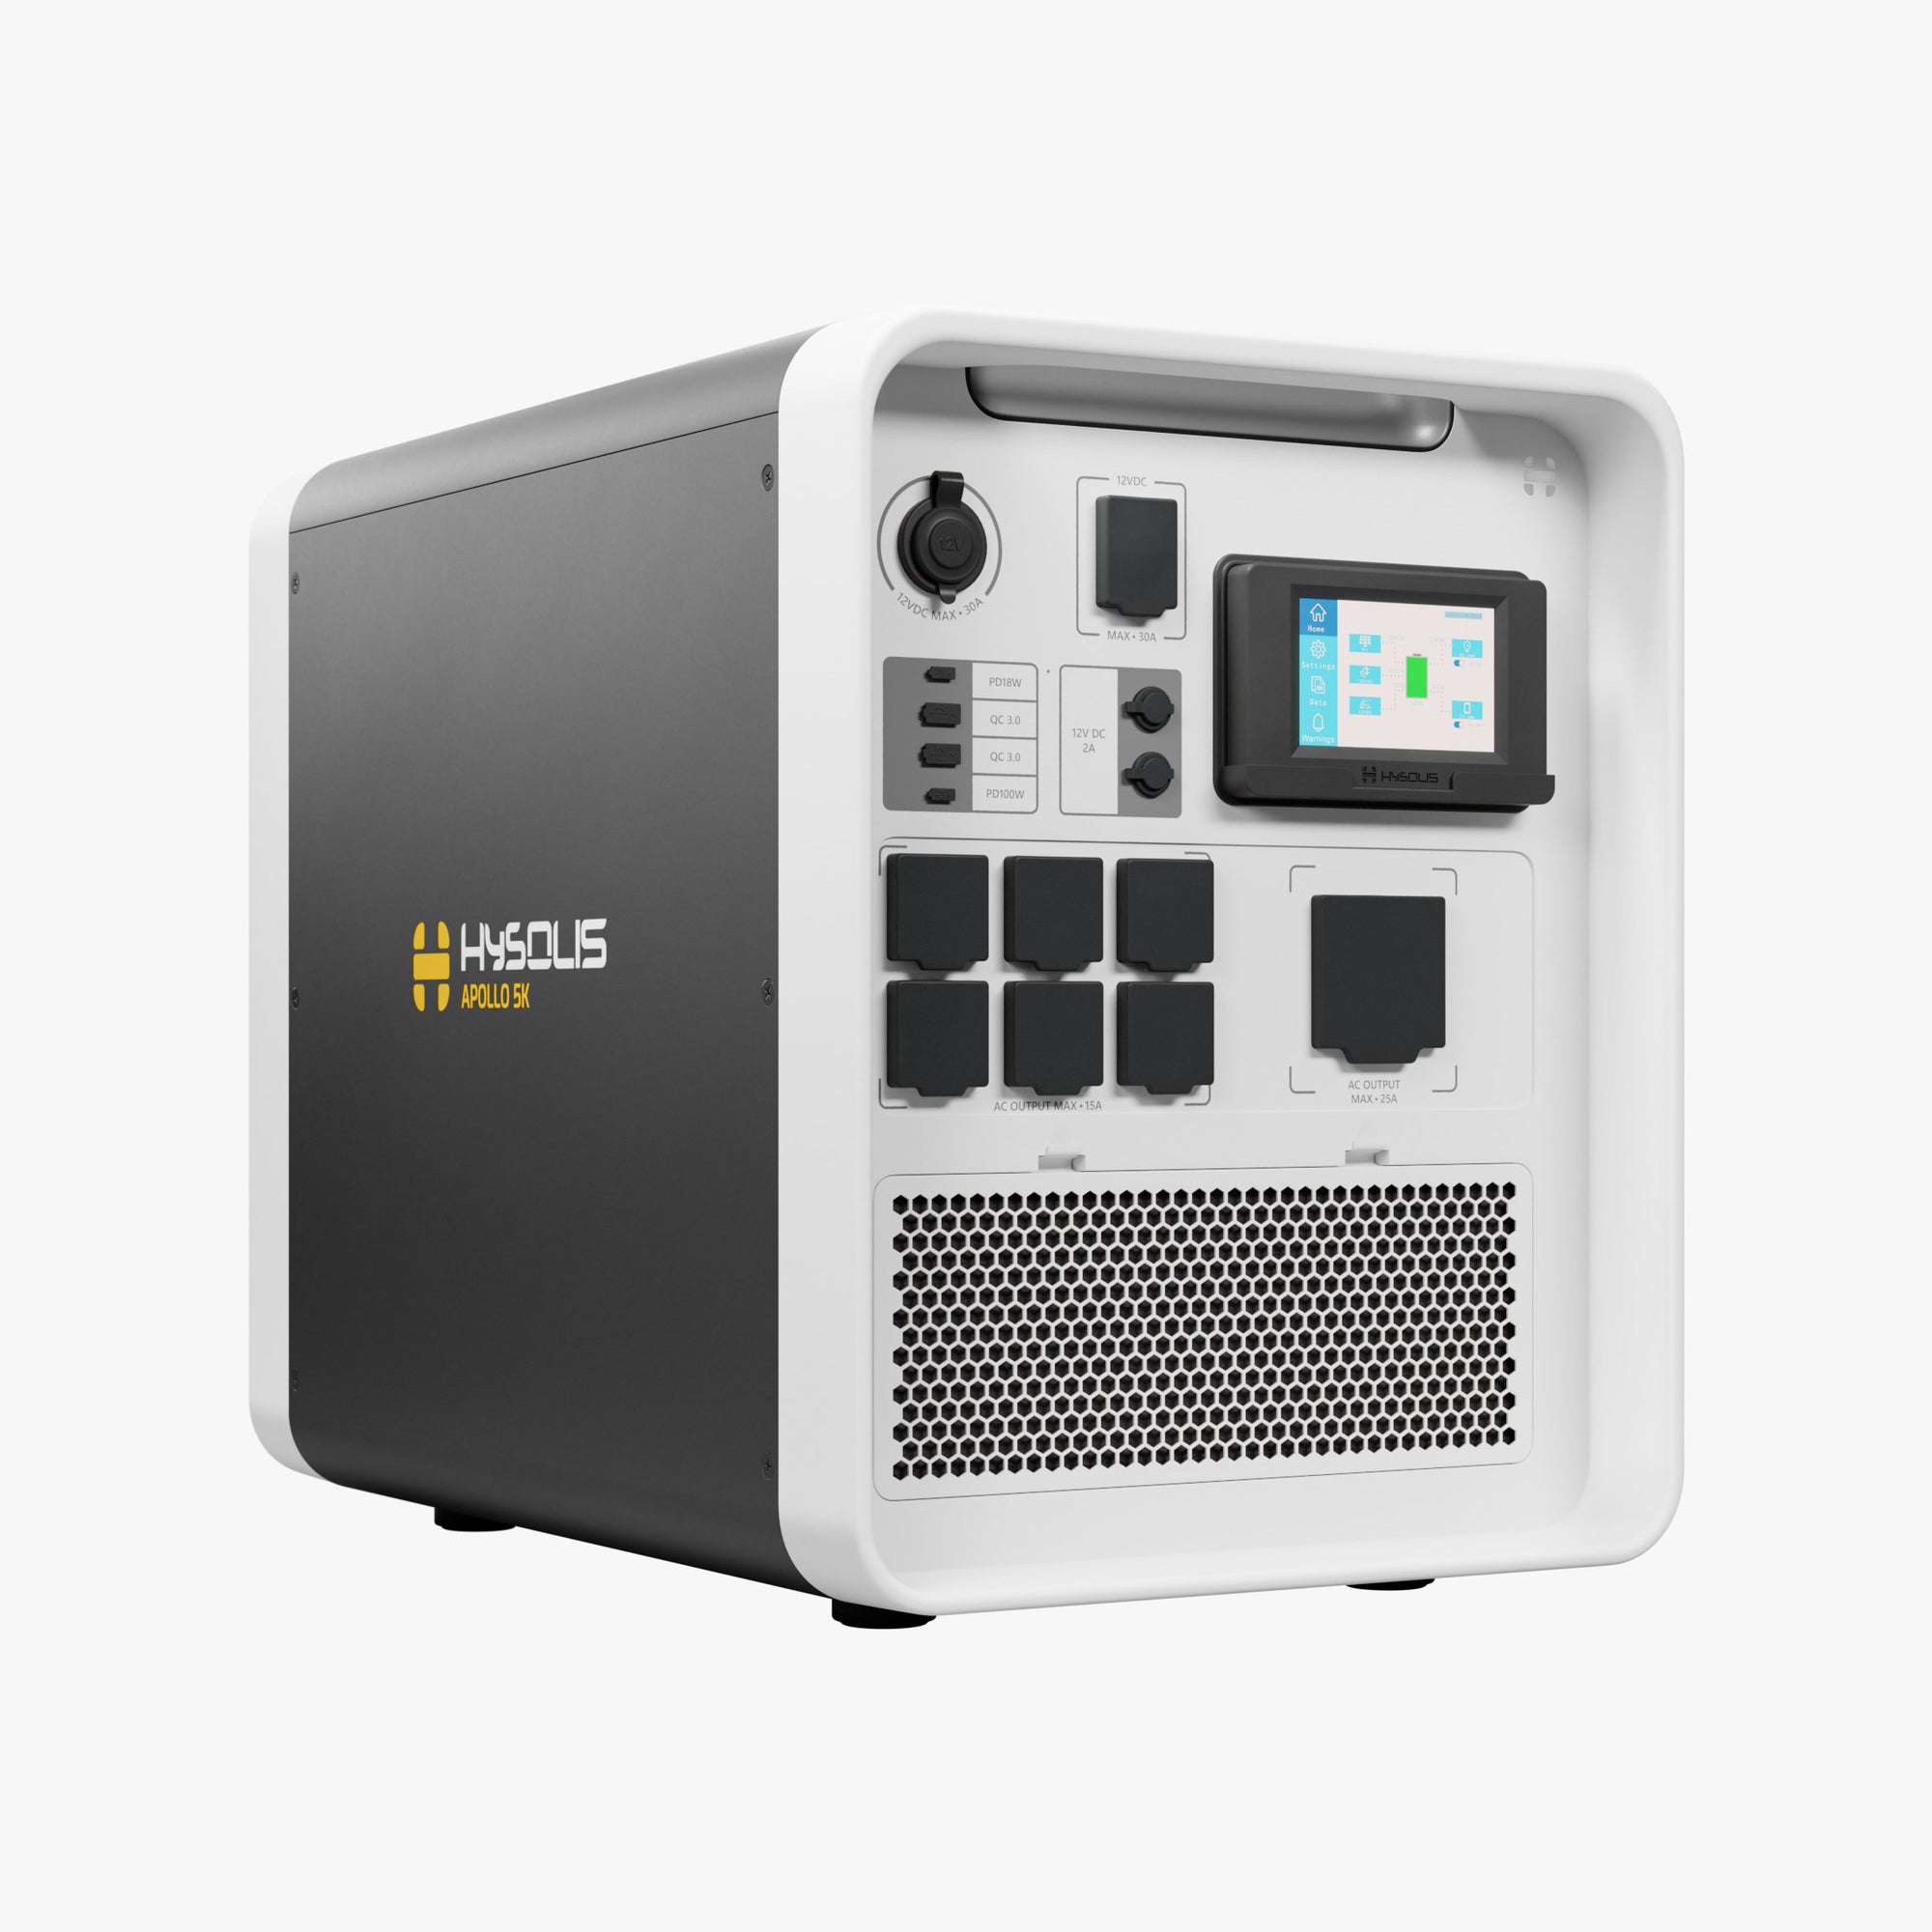 HYSOLIS, 45kWh Lithium Battery 3kW rated output 15kW Solar Power All-in-one  Plug n Play Solar Generator